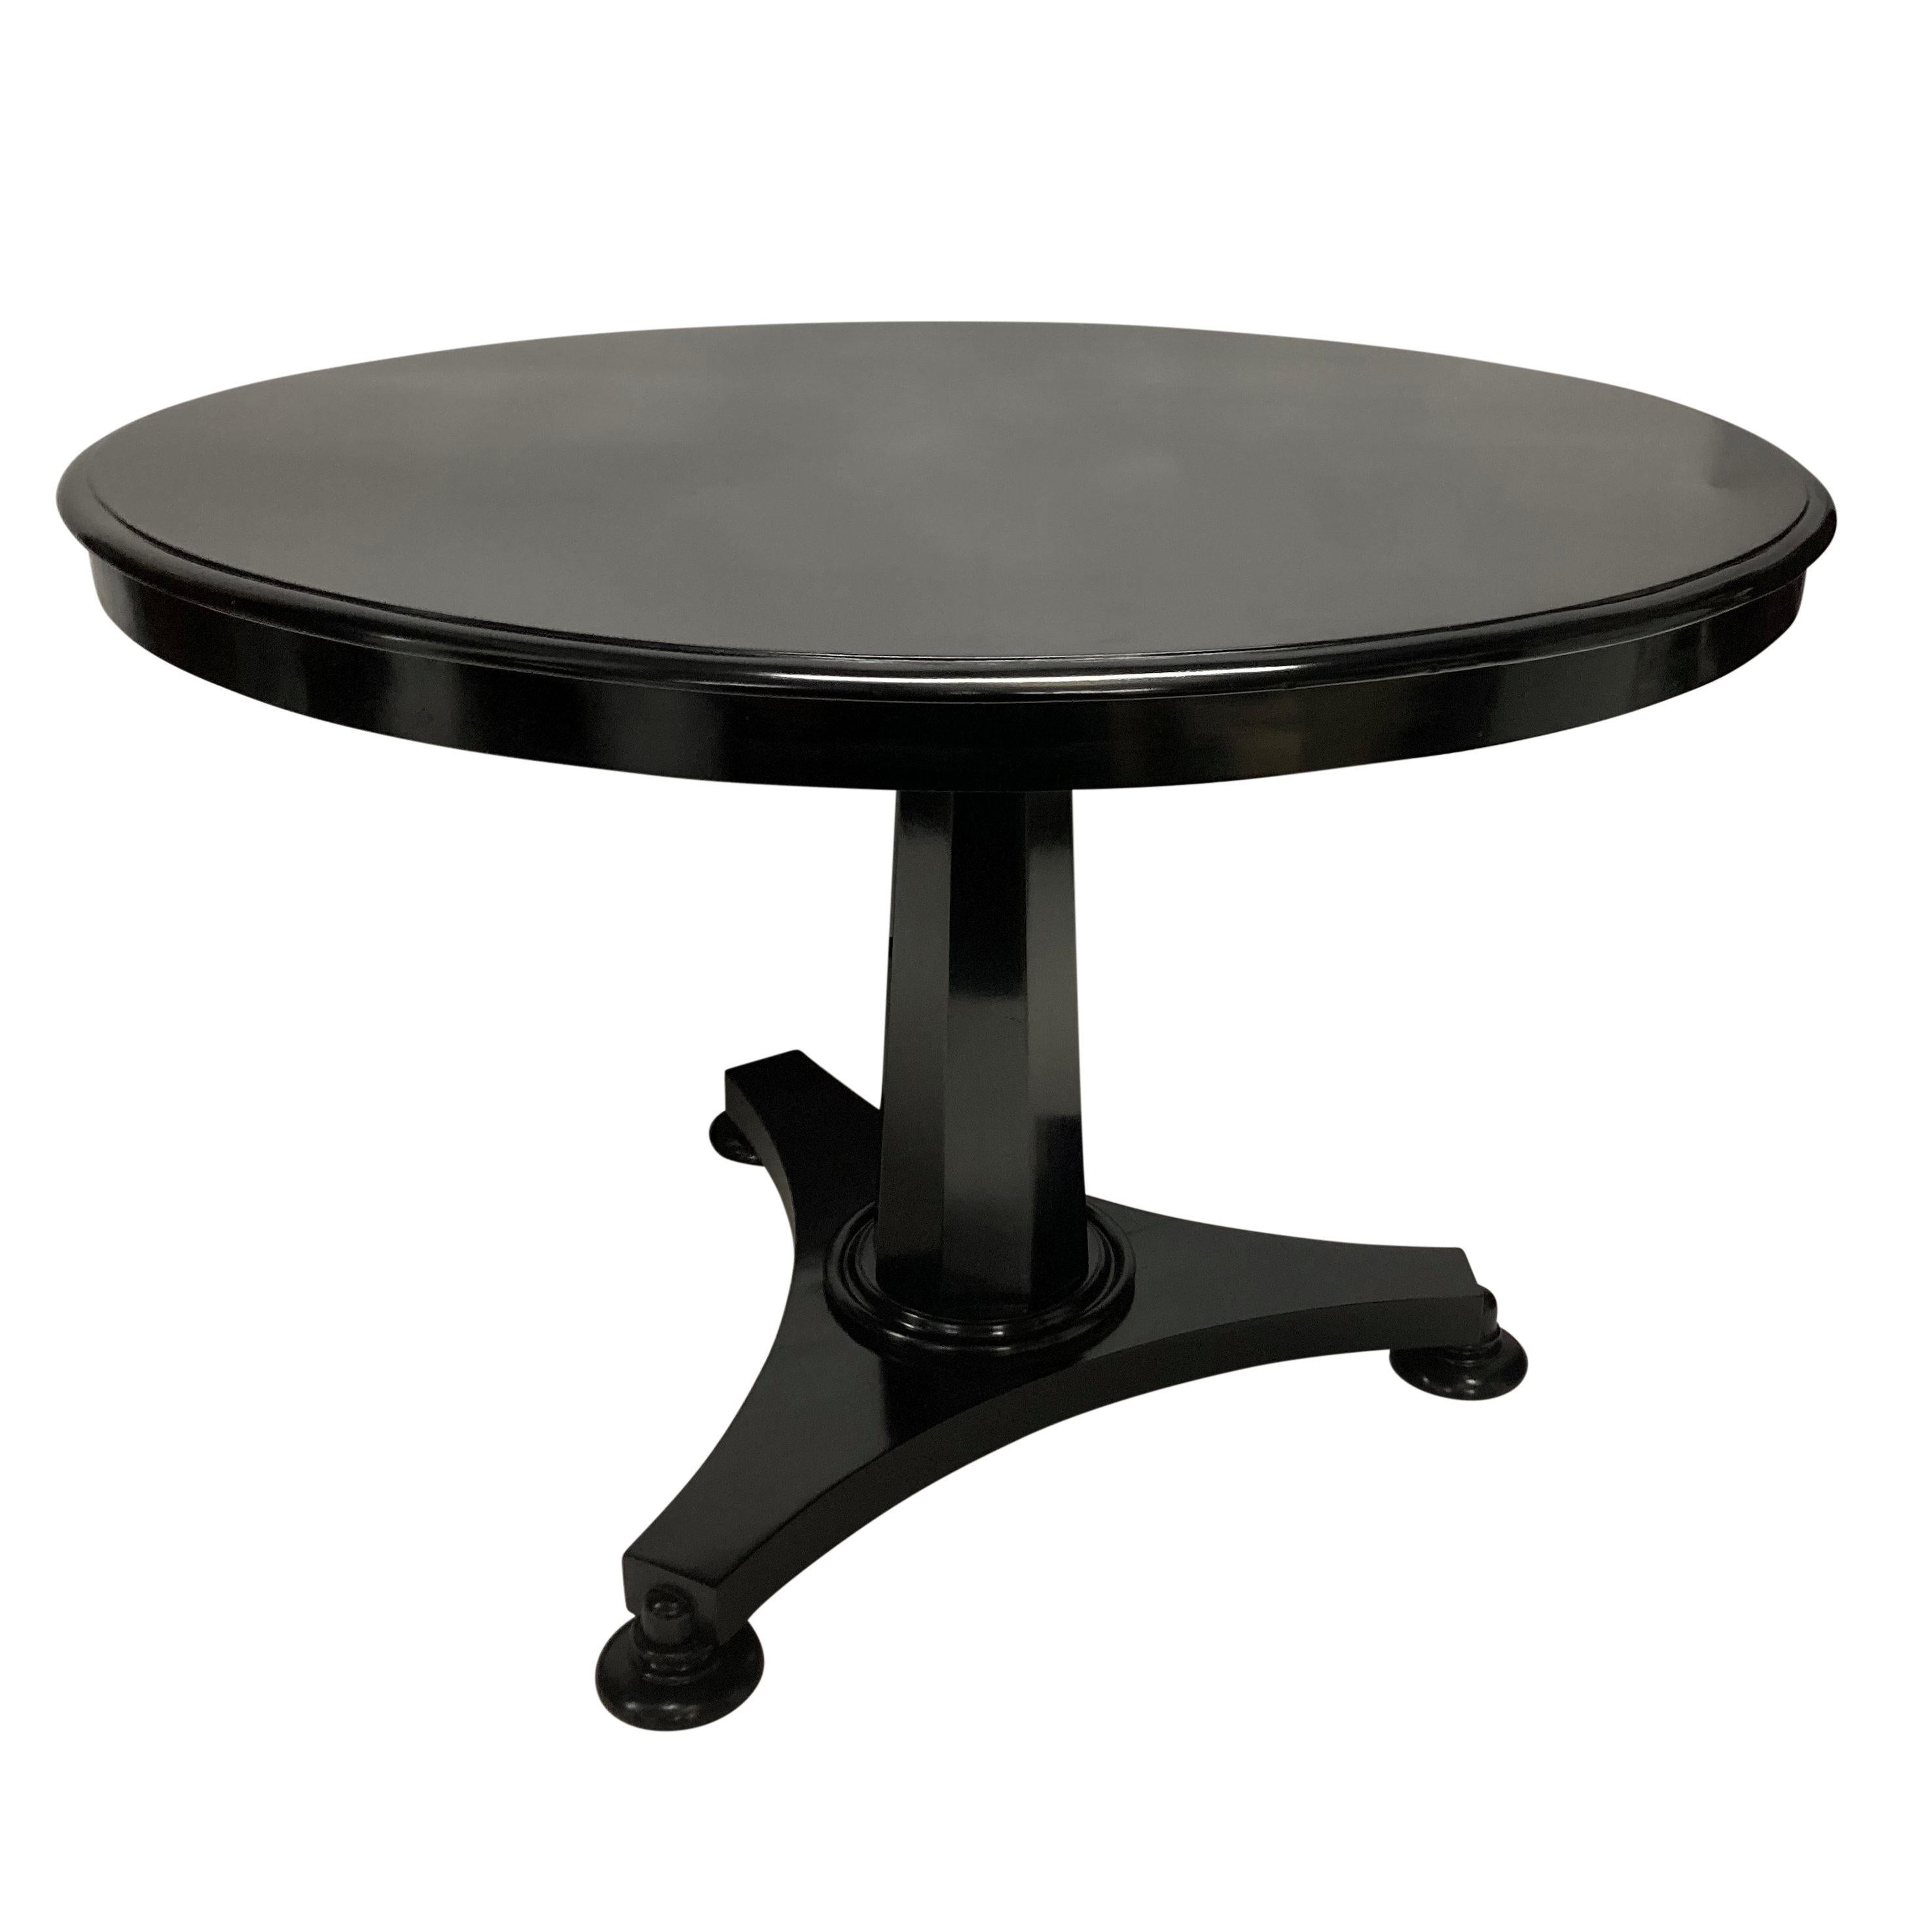 Mid-20th Century Black Lacquered French Gueridon Table